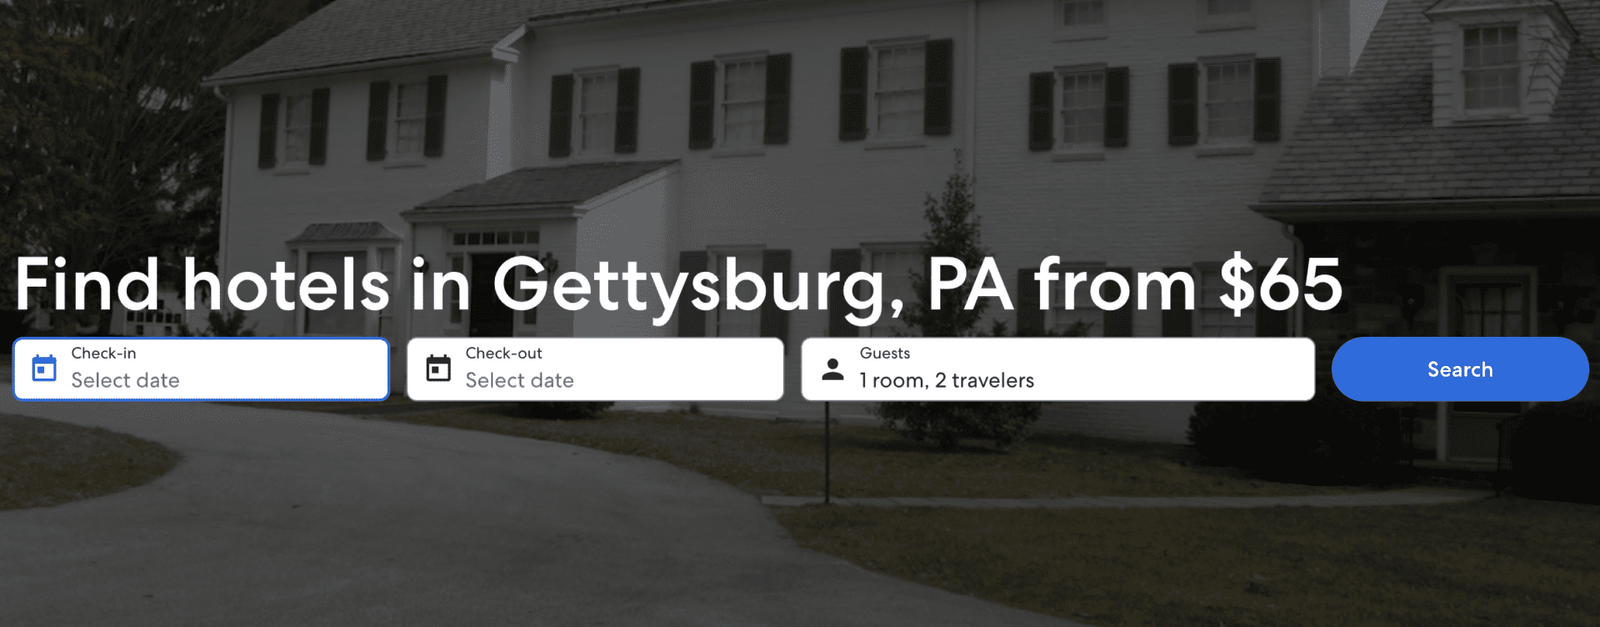 ghost tours gettysburg pa